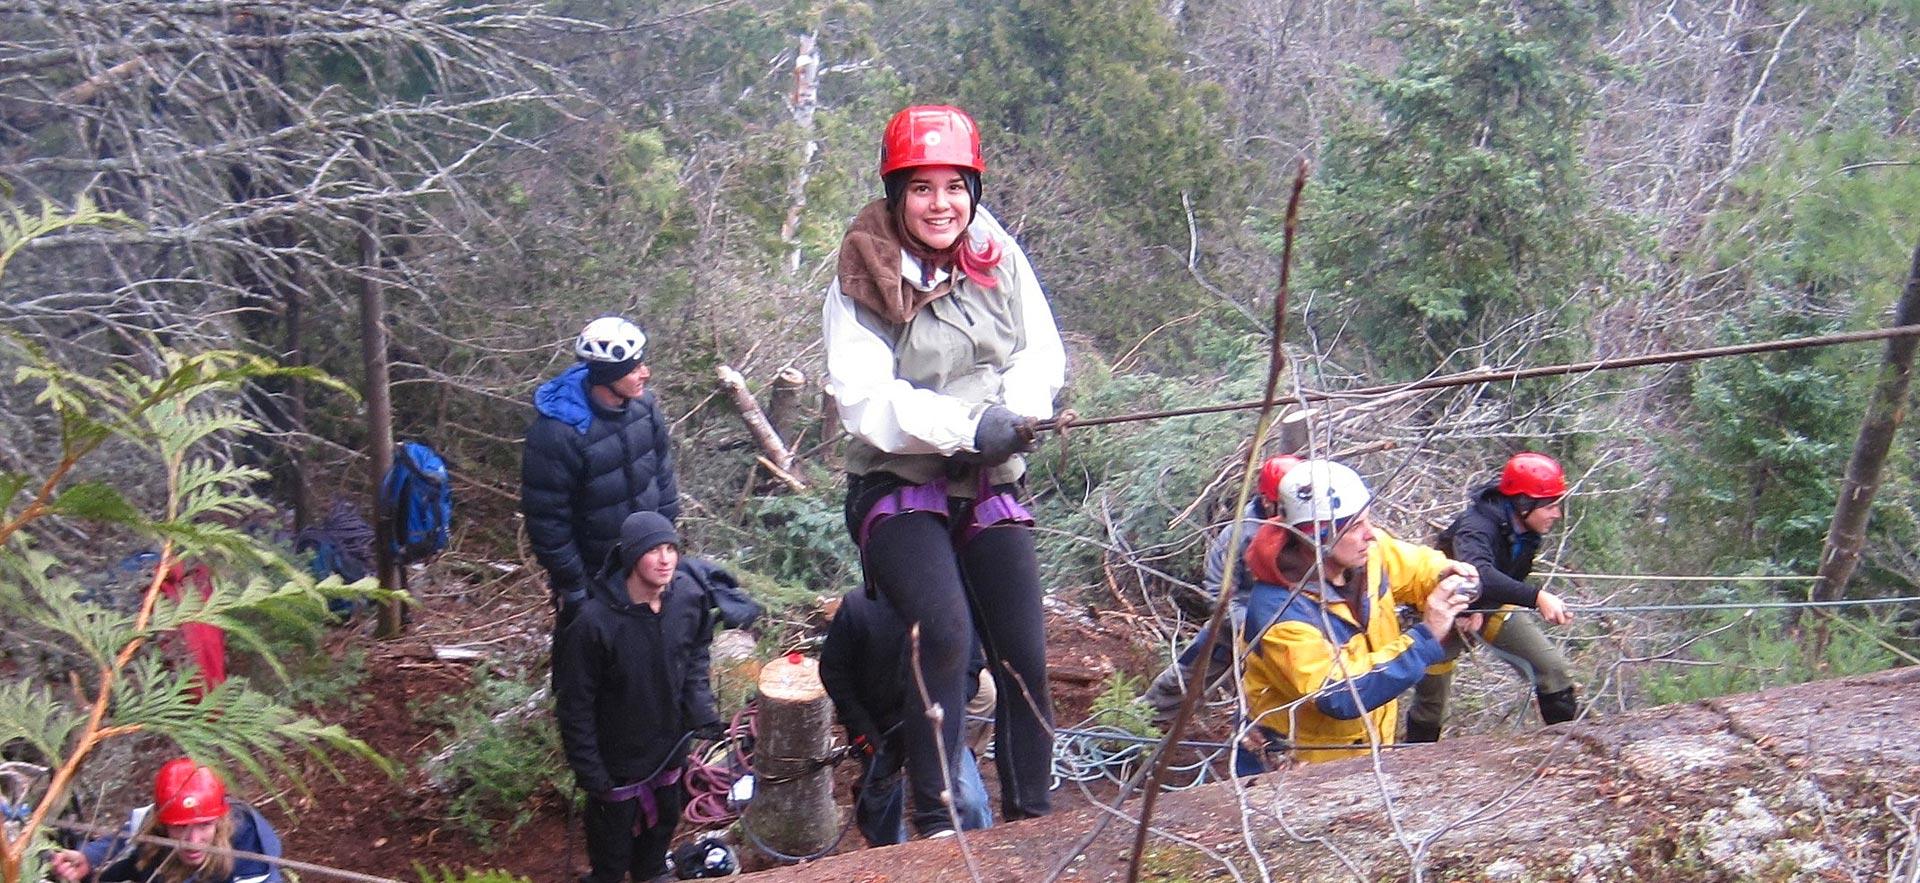 Female student smiles for camera while rock climbing.